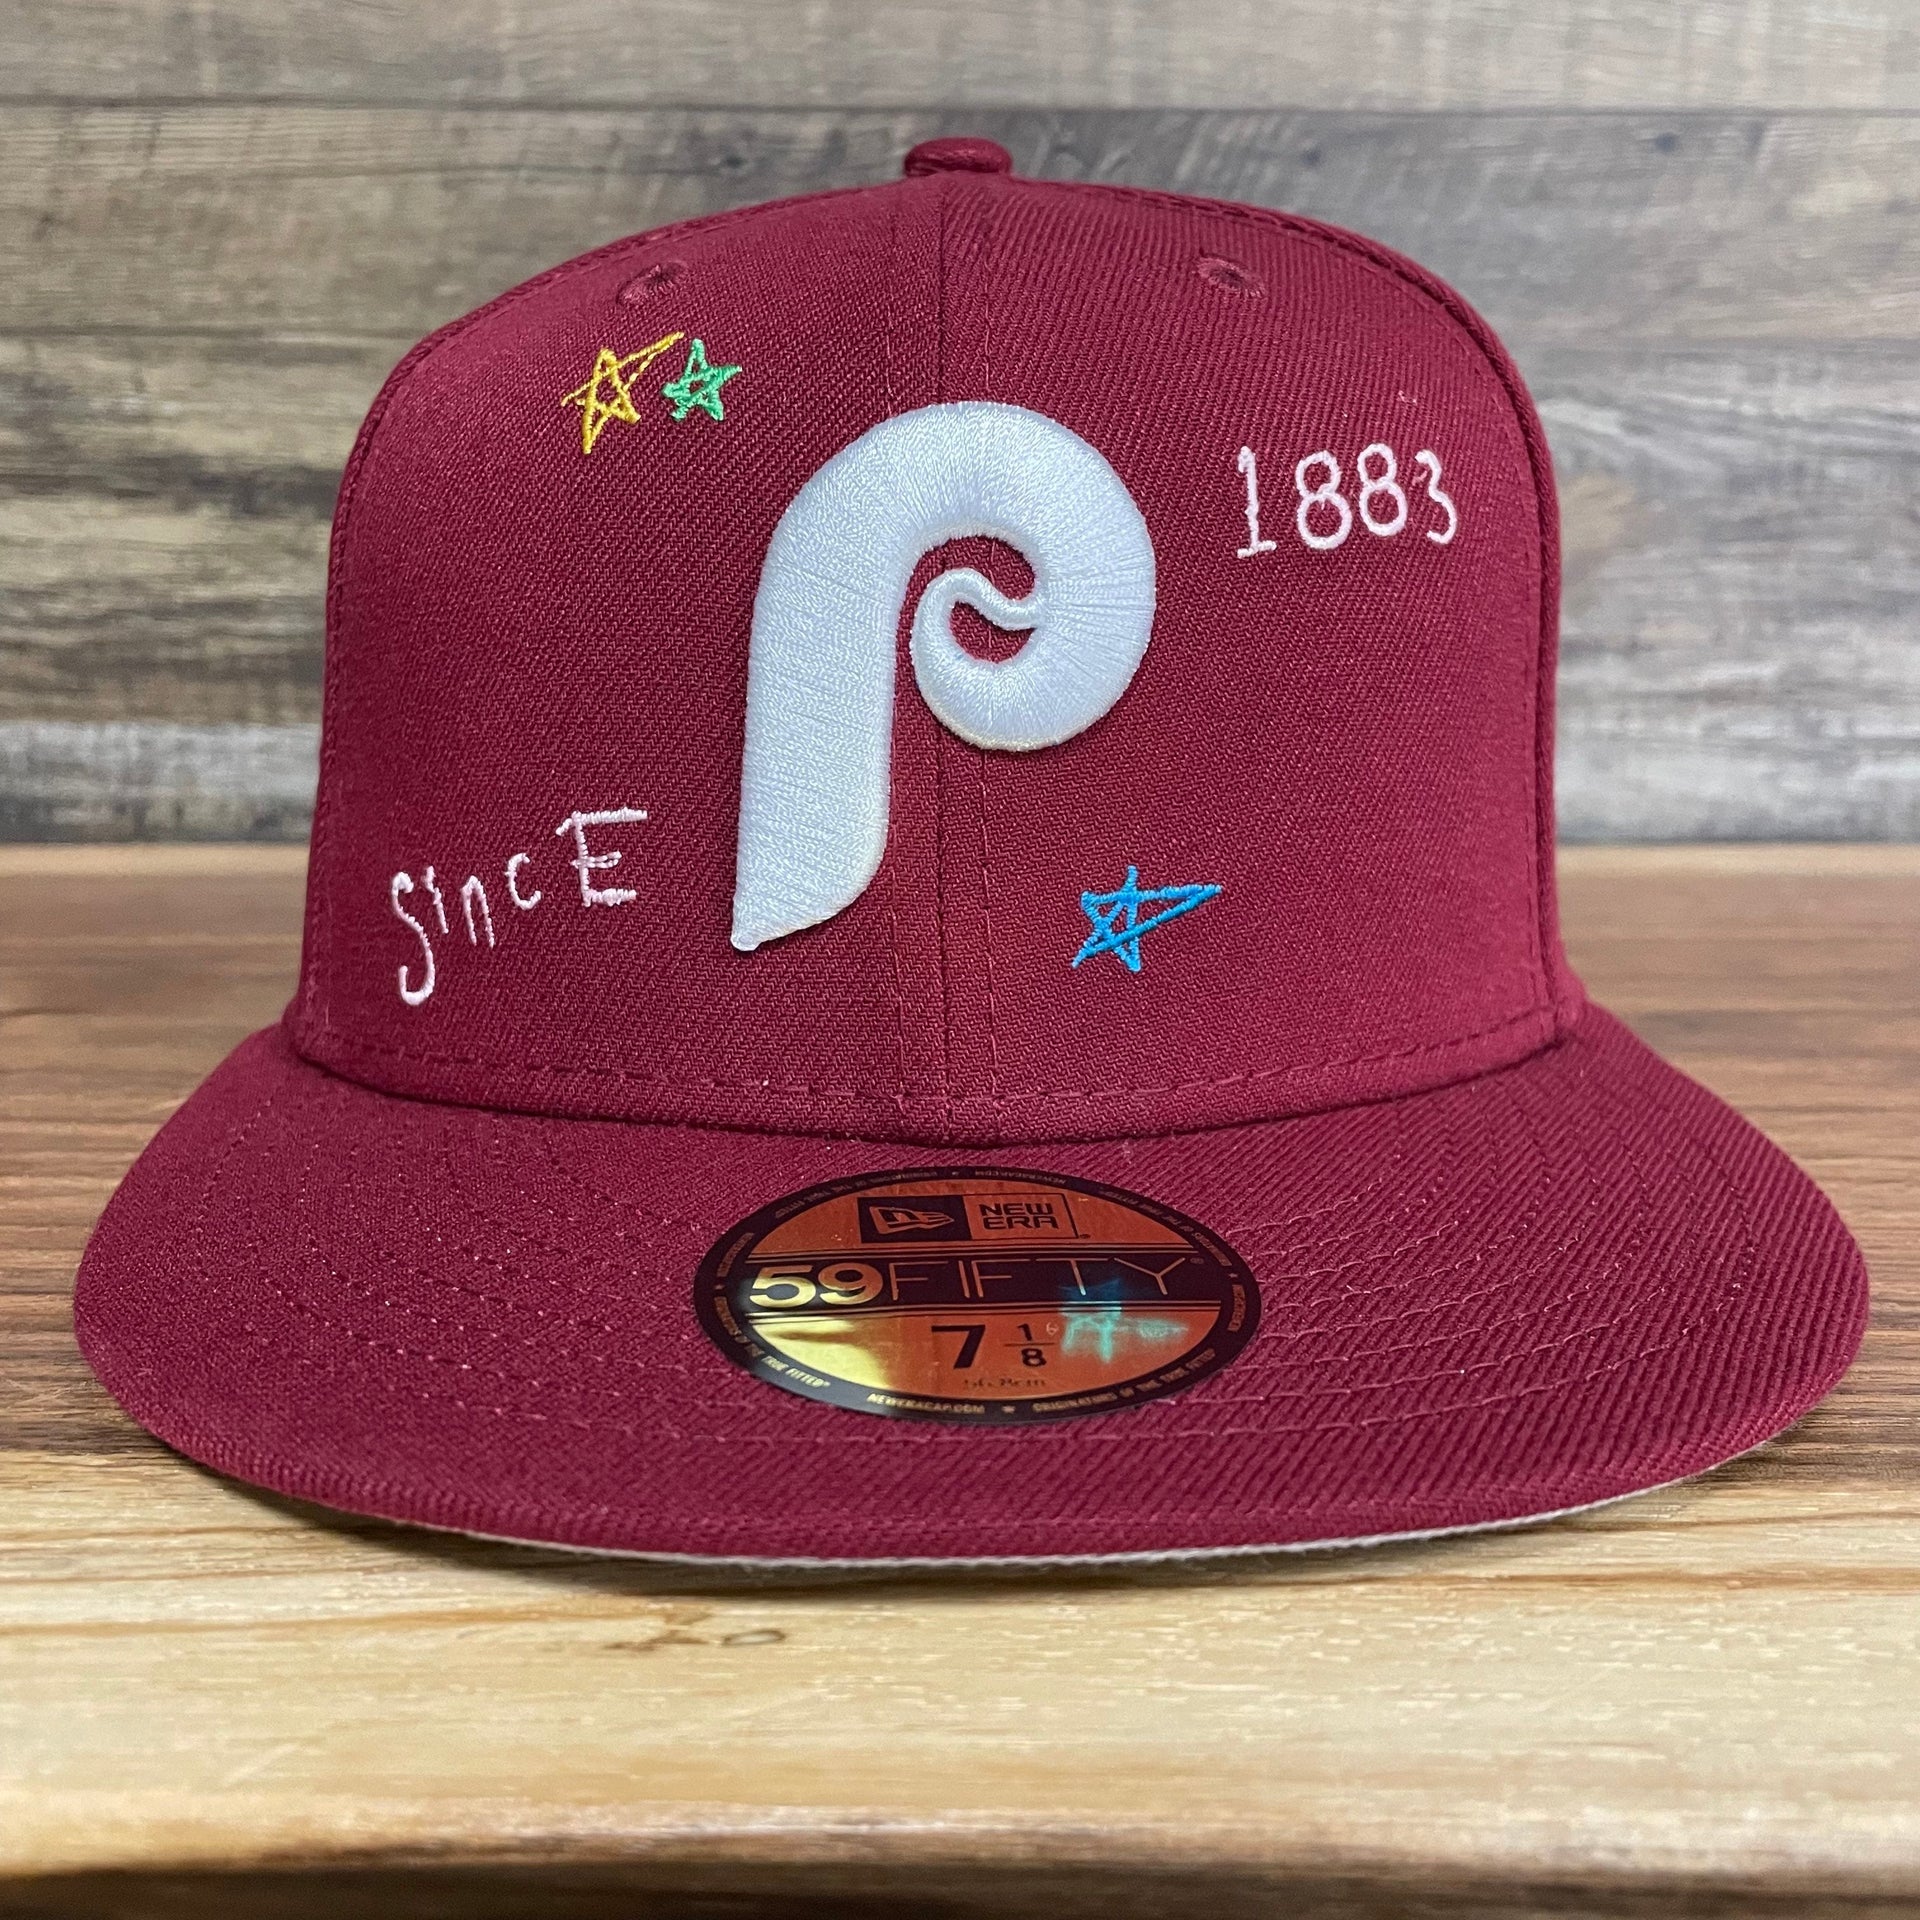 The front of the Philadelphia Phillies Cooperstown “Scribble” Side Patch Gray Bottom 59Fifty Fitted Cap